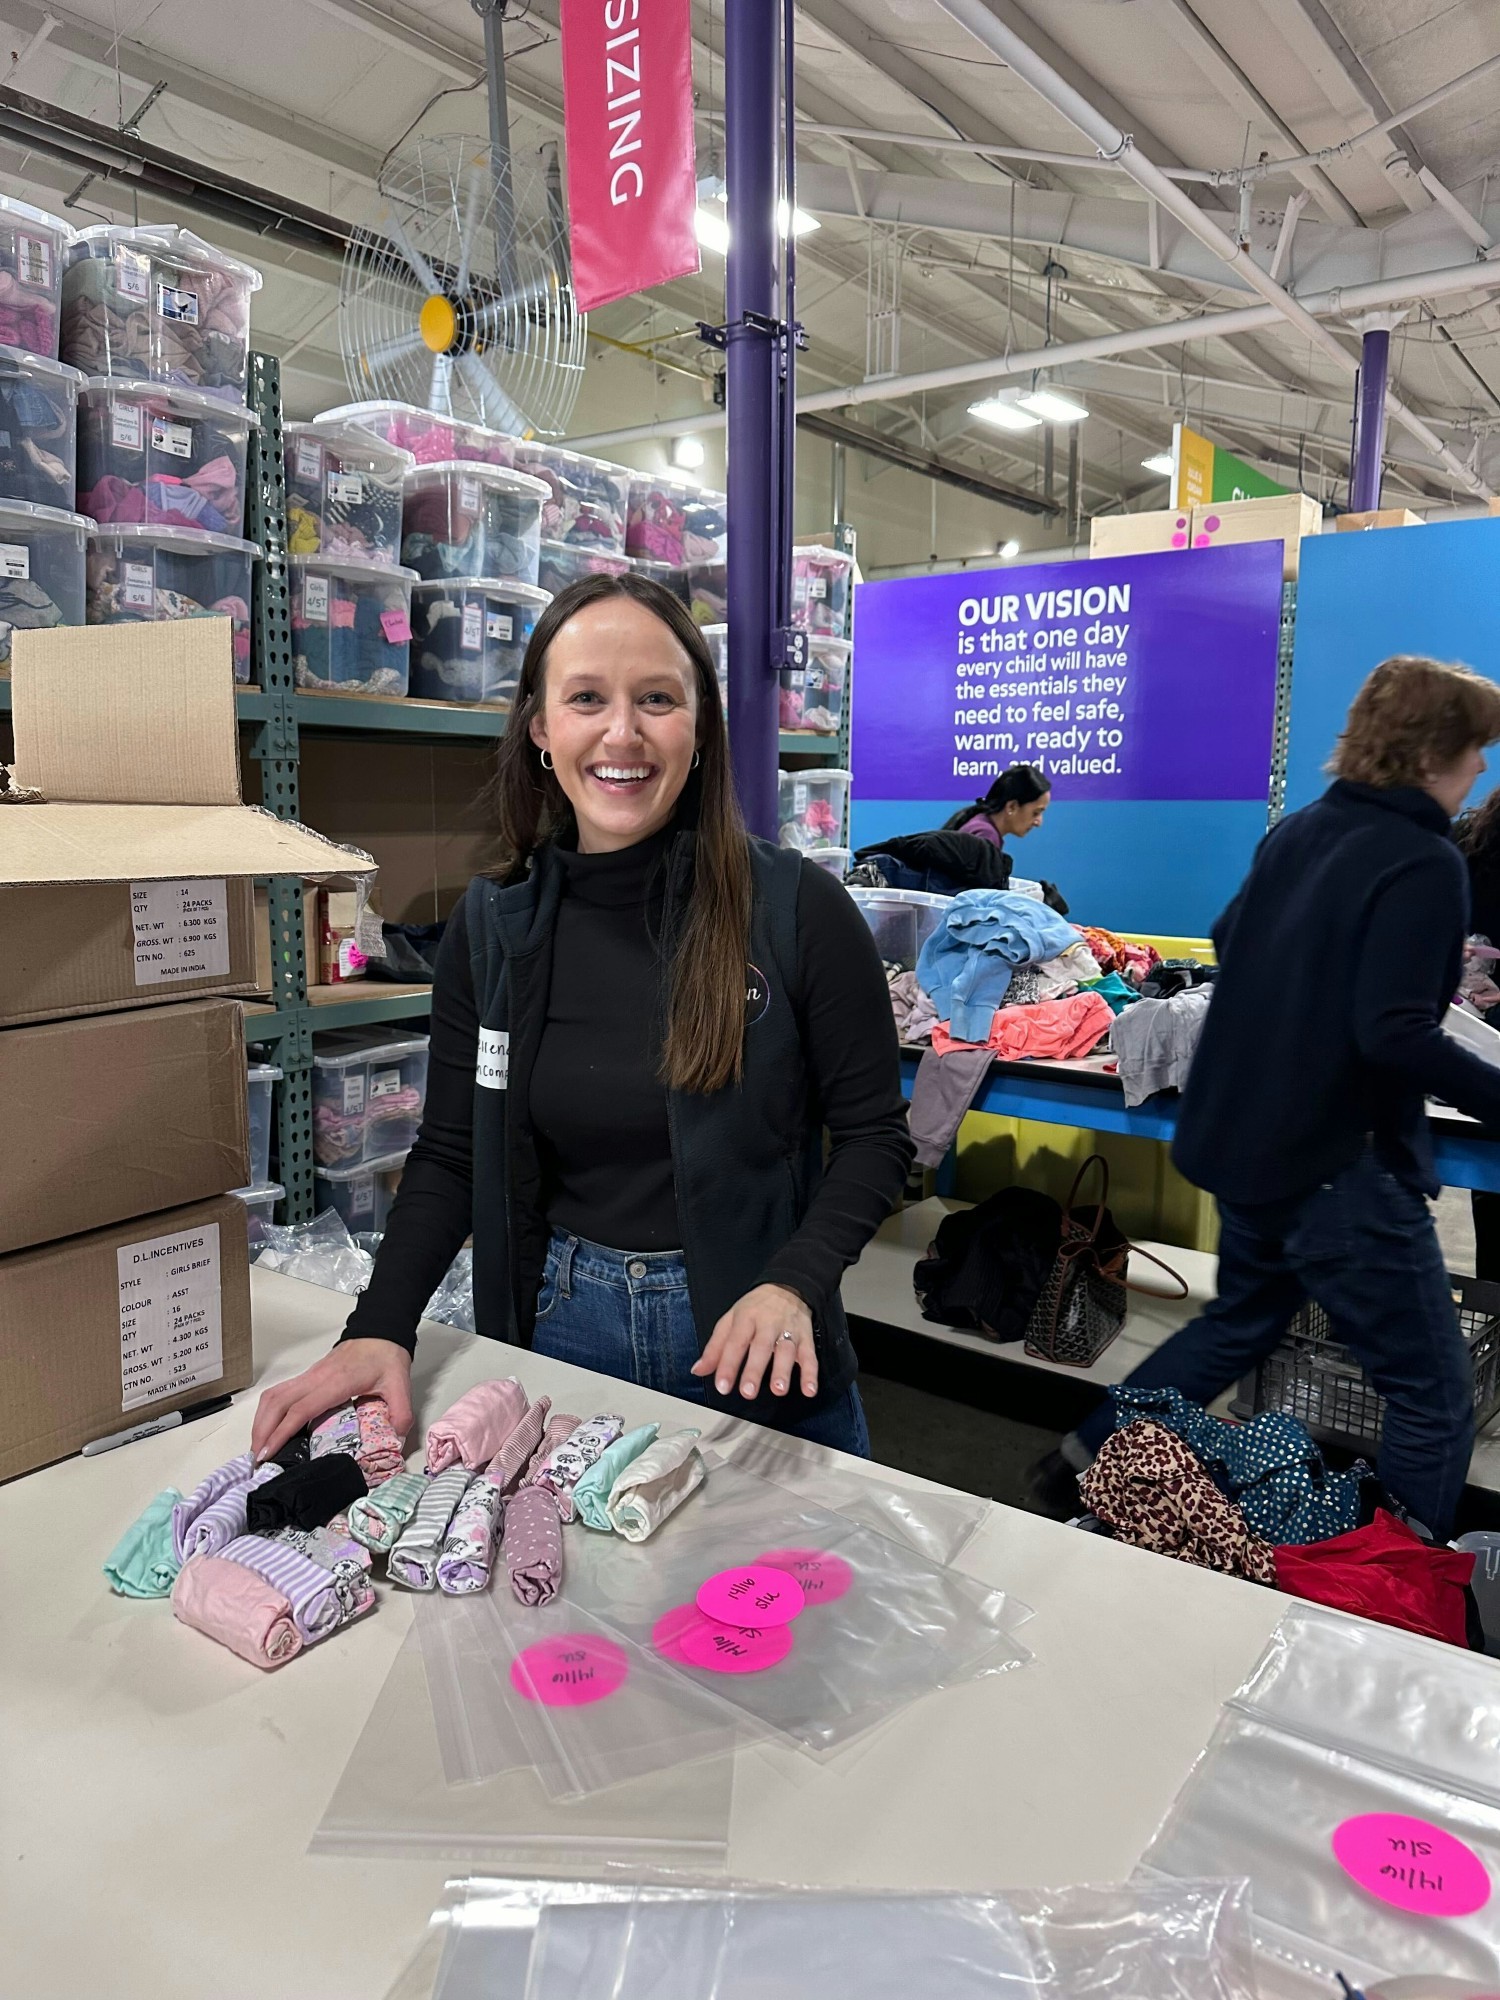 Boston-based colleagues sort and package clothes for children in need around Massachusetts.